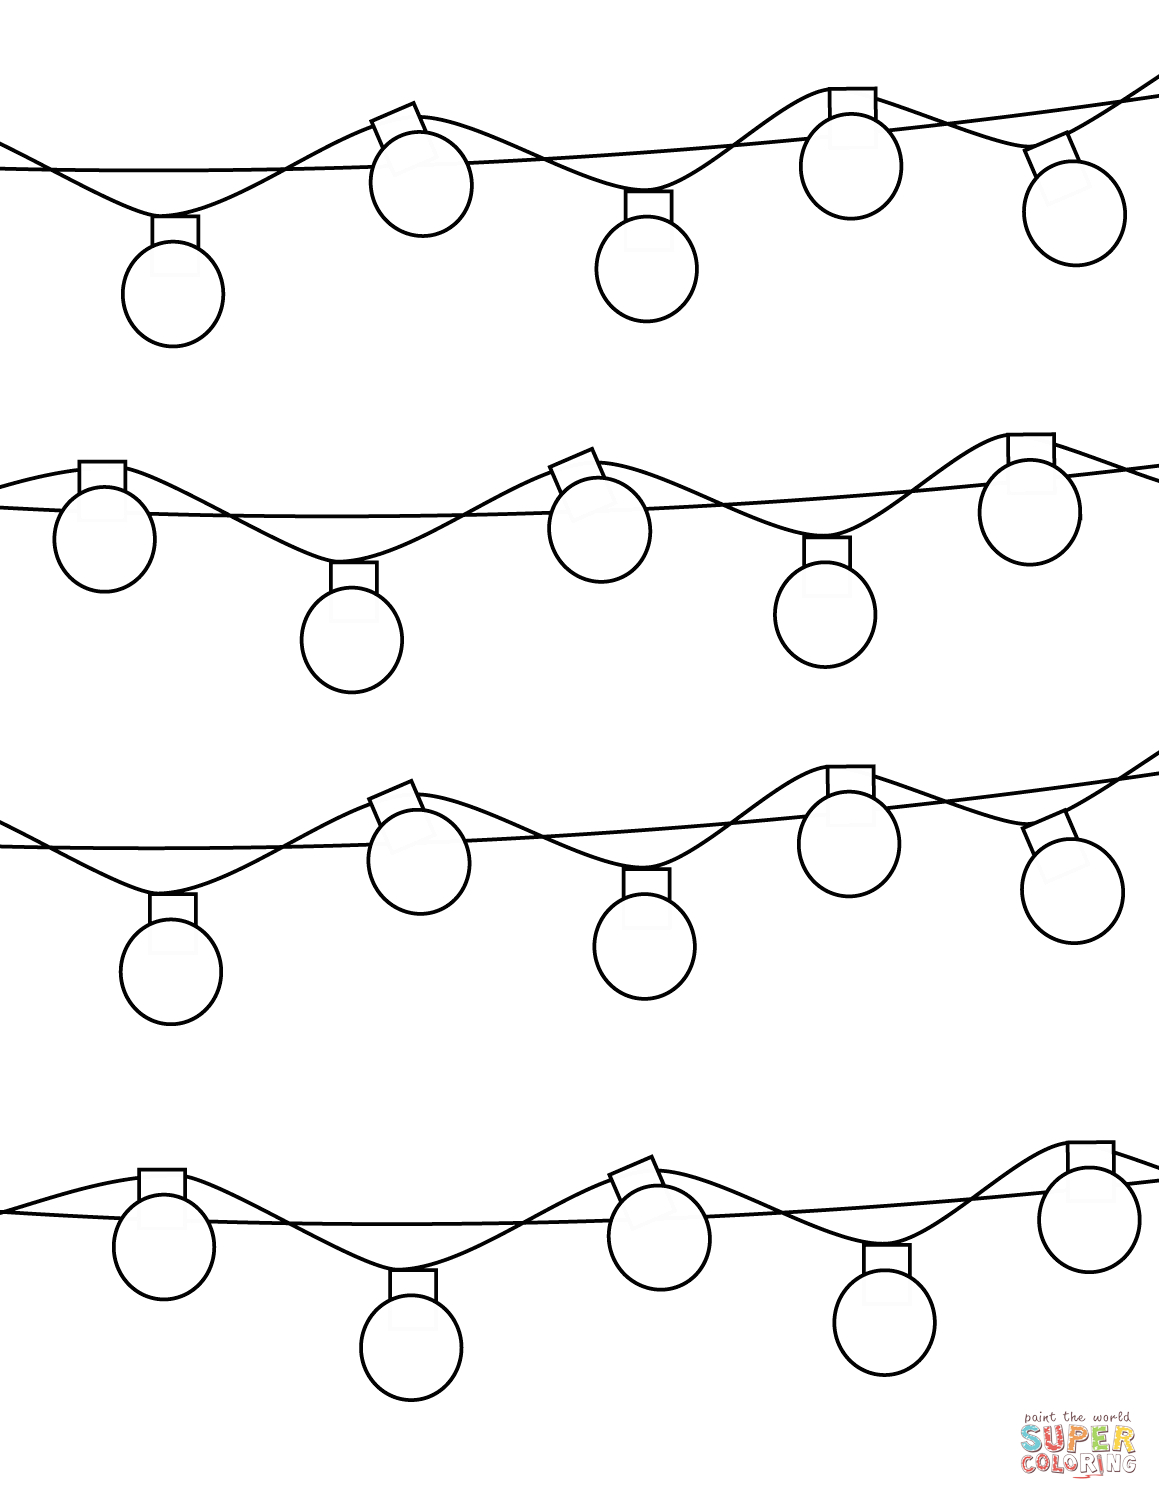 Christmas Lights | Super Coloring | Coloring Pages - Free Printable Christmas Lights Coloring Pages